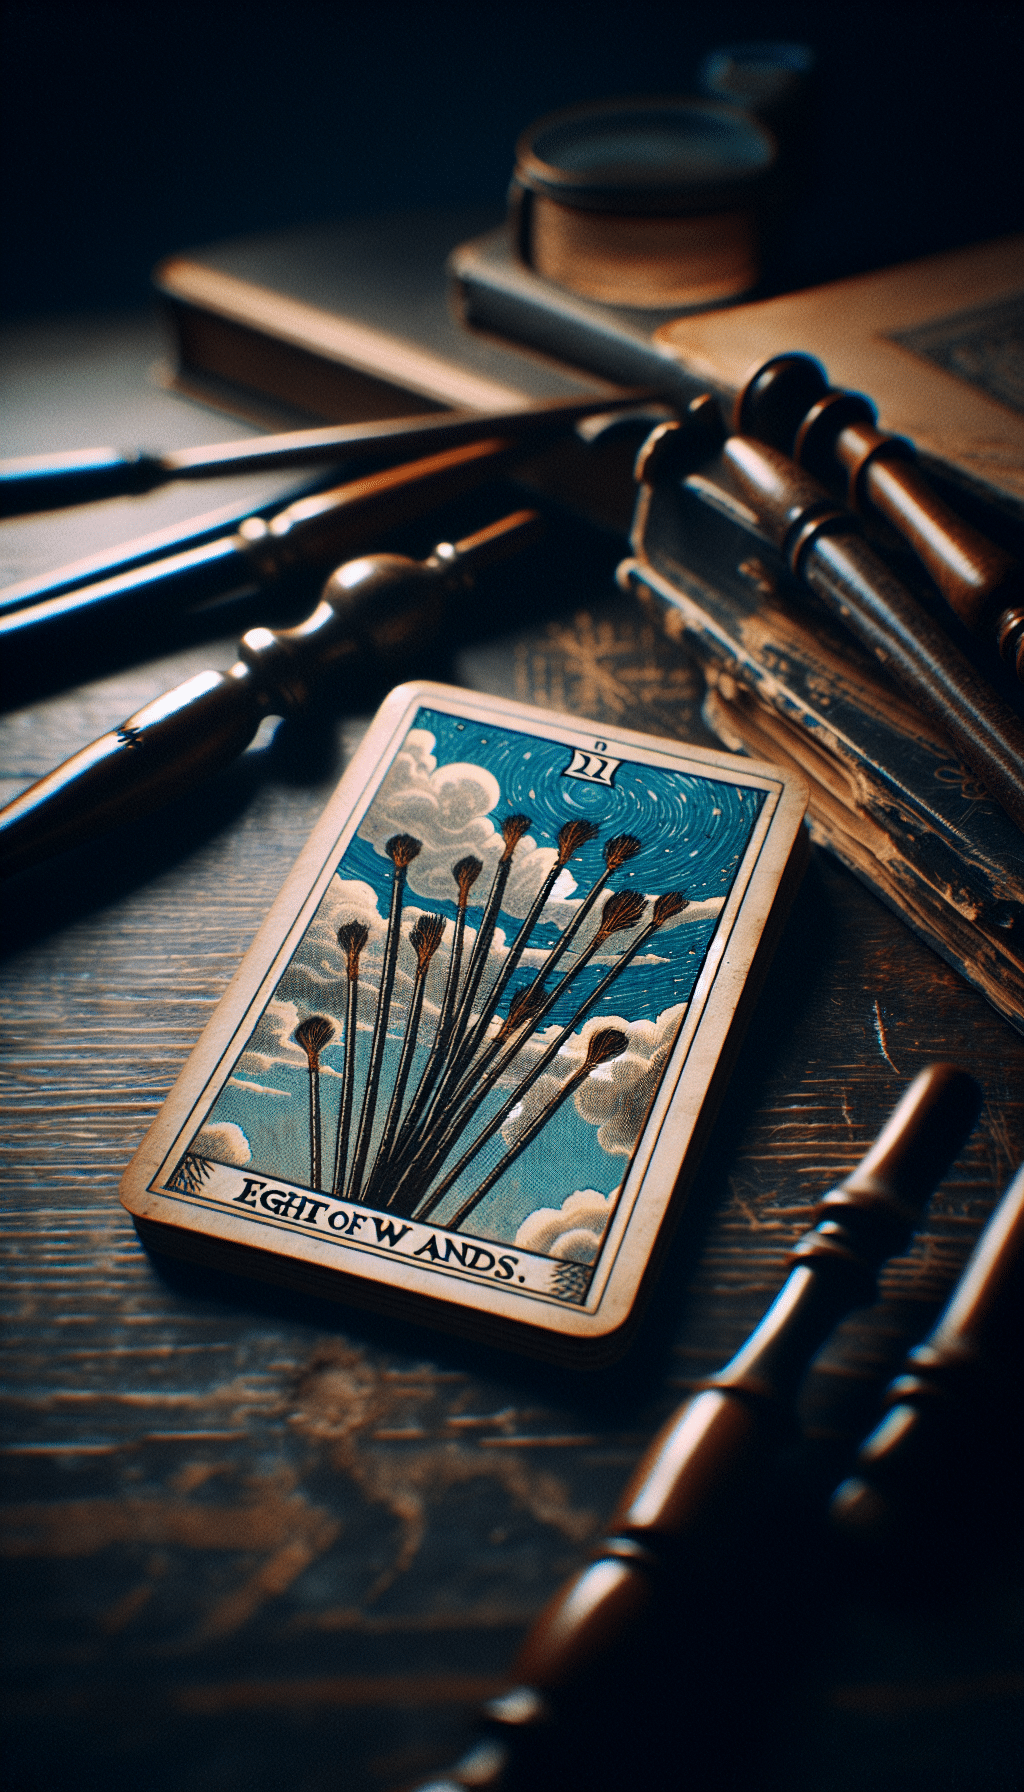 eight of wands tarot card conflict resolution